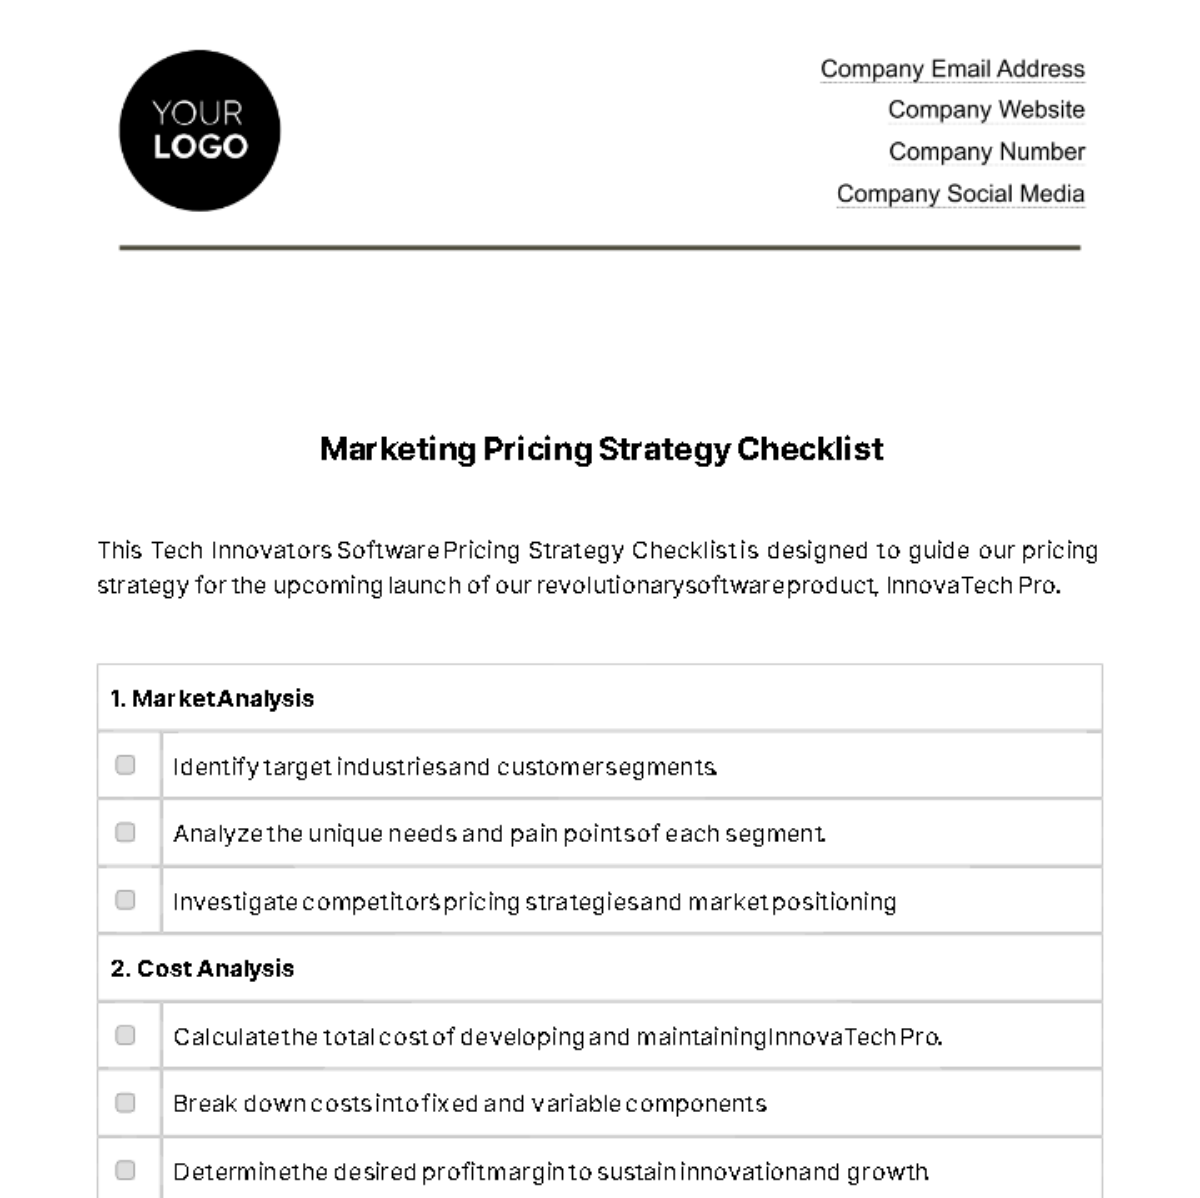 Marketing Pricing Strategy Checklist Template